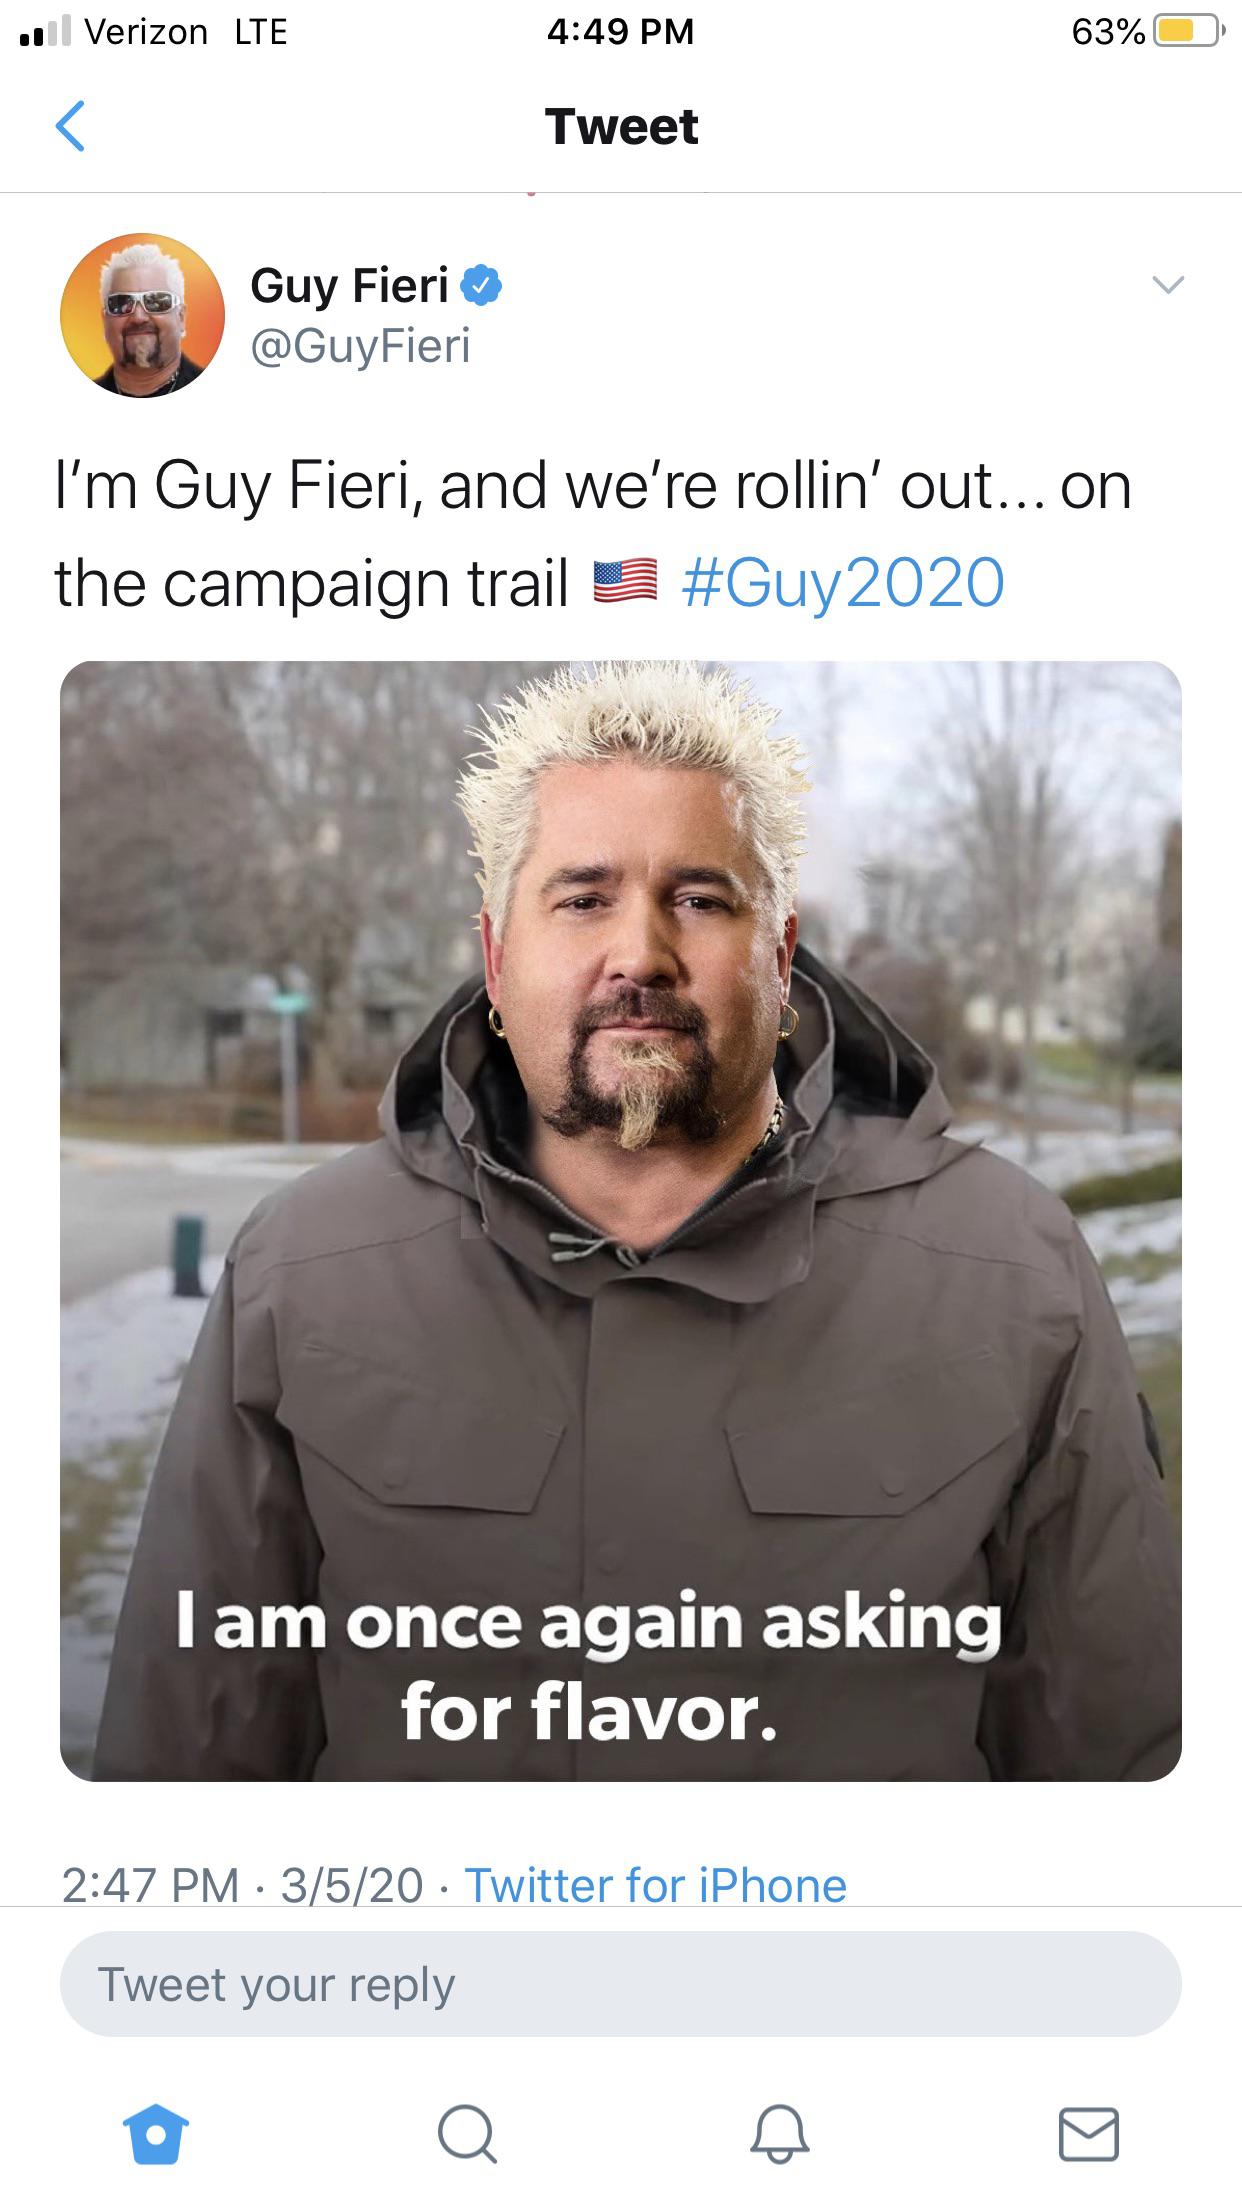 photo caption - .11 Verizon Lte 63%O Tweet Guy Fieri Fieri I'm Guy Fieri, and we're rollin' out... on the campaign trail I am once again asking for flavor. 3520 Twitter for iPhone Tweet your